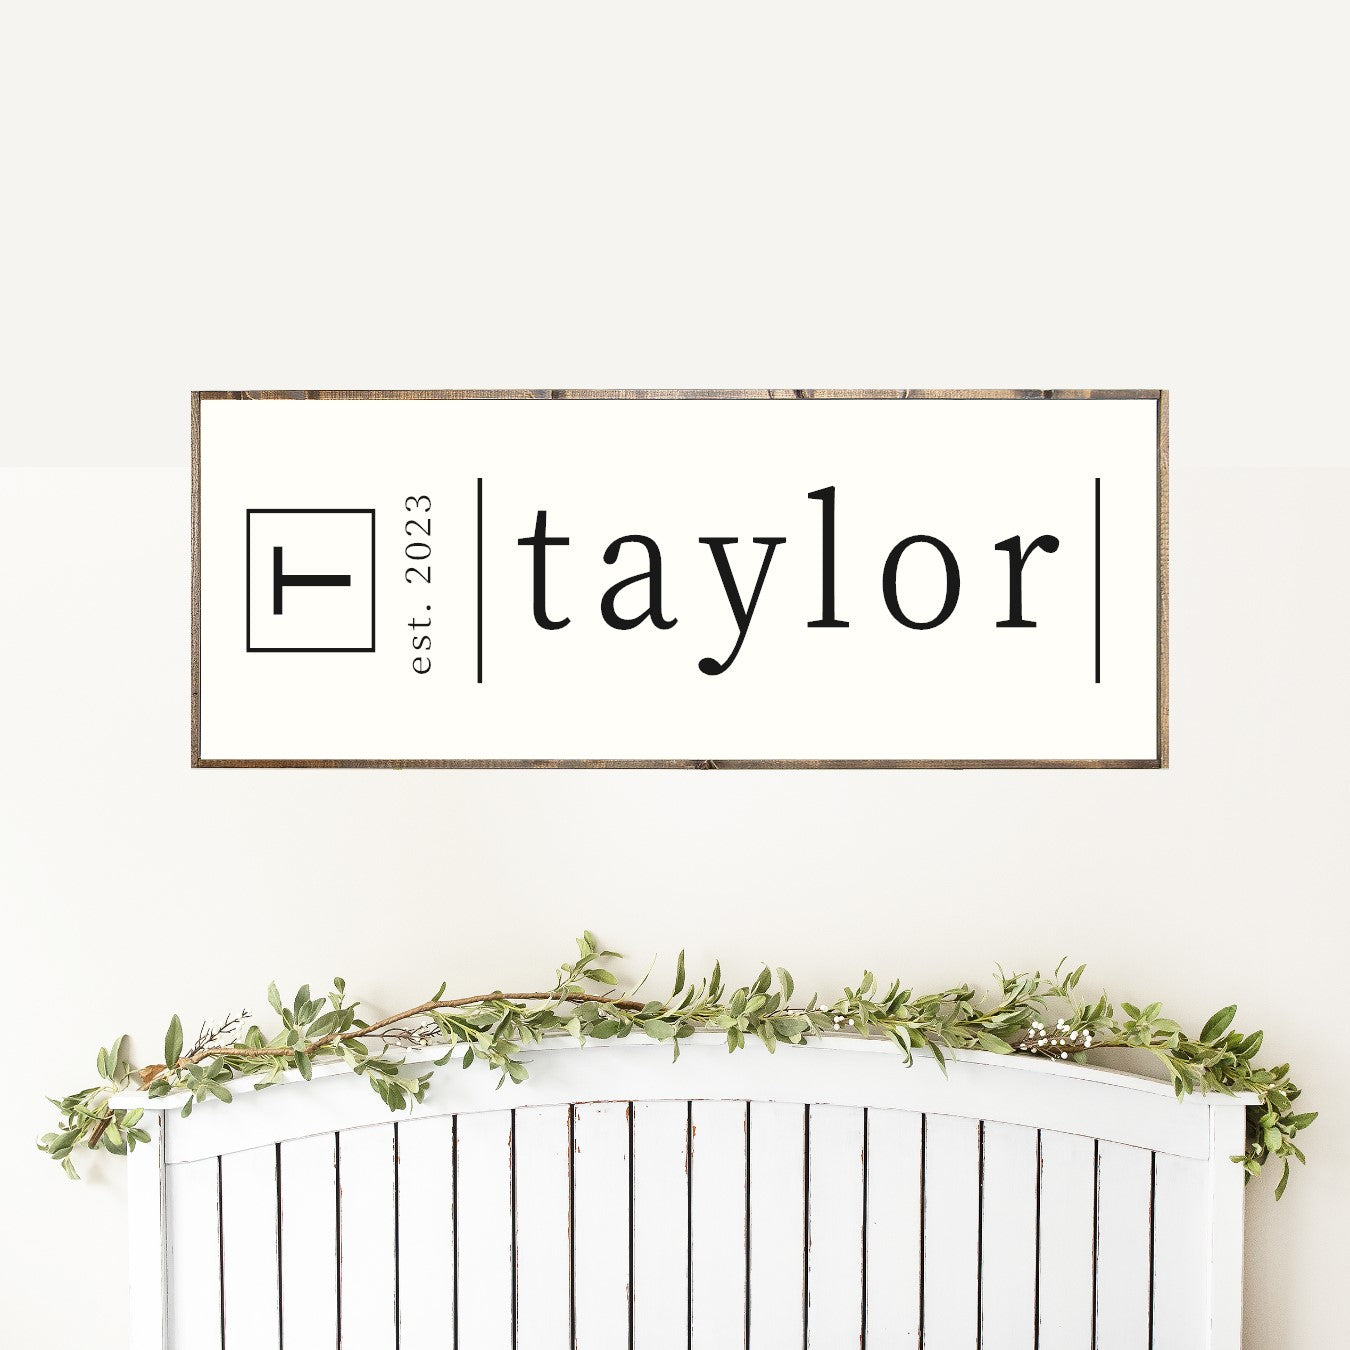 Book End Wedding Sign Last Name Canvas Printed Sign